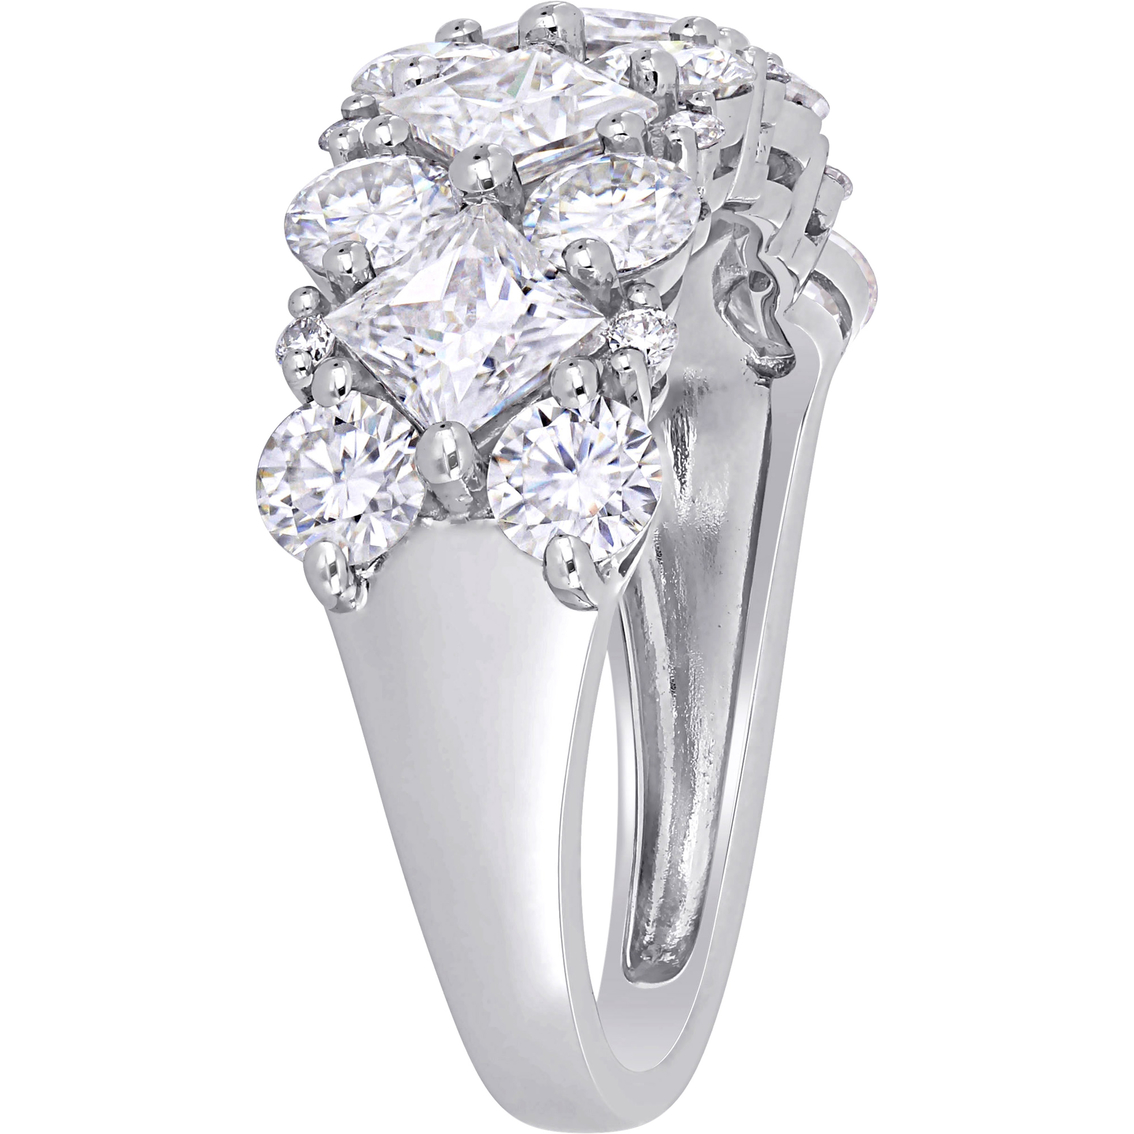 Bella Terra 10K White Gold 3 5/8 CTW Created Moissanite and 1/10 CTW Diamond Band - Image 2 of 4